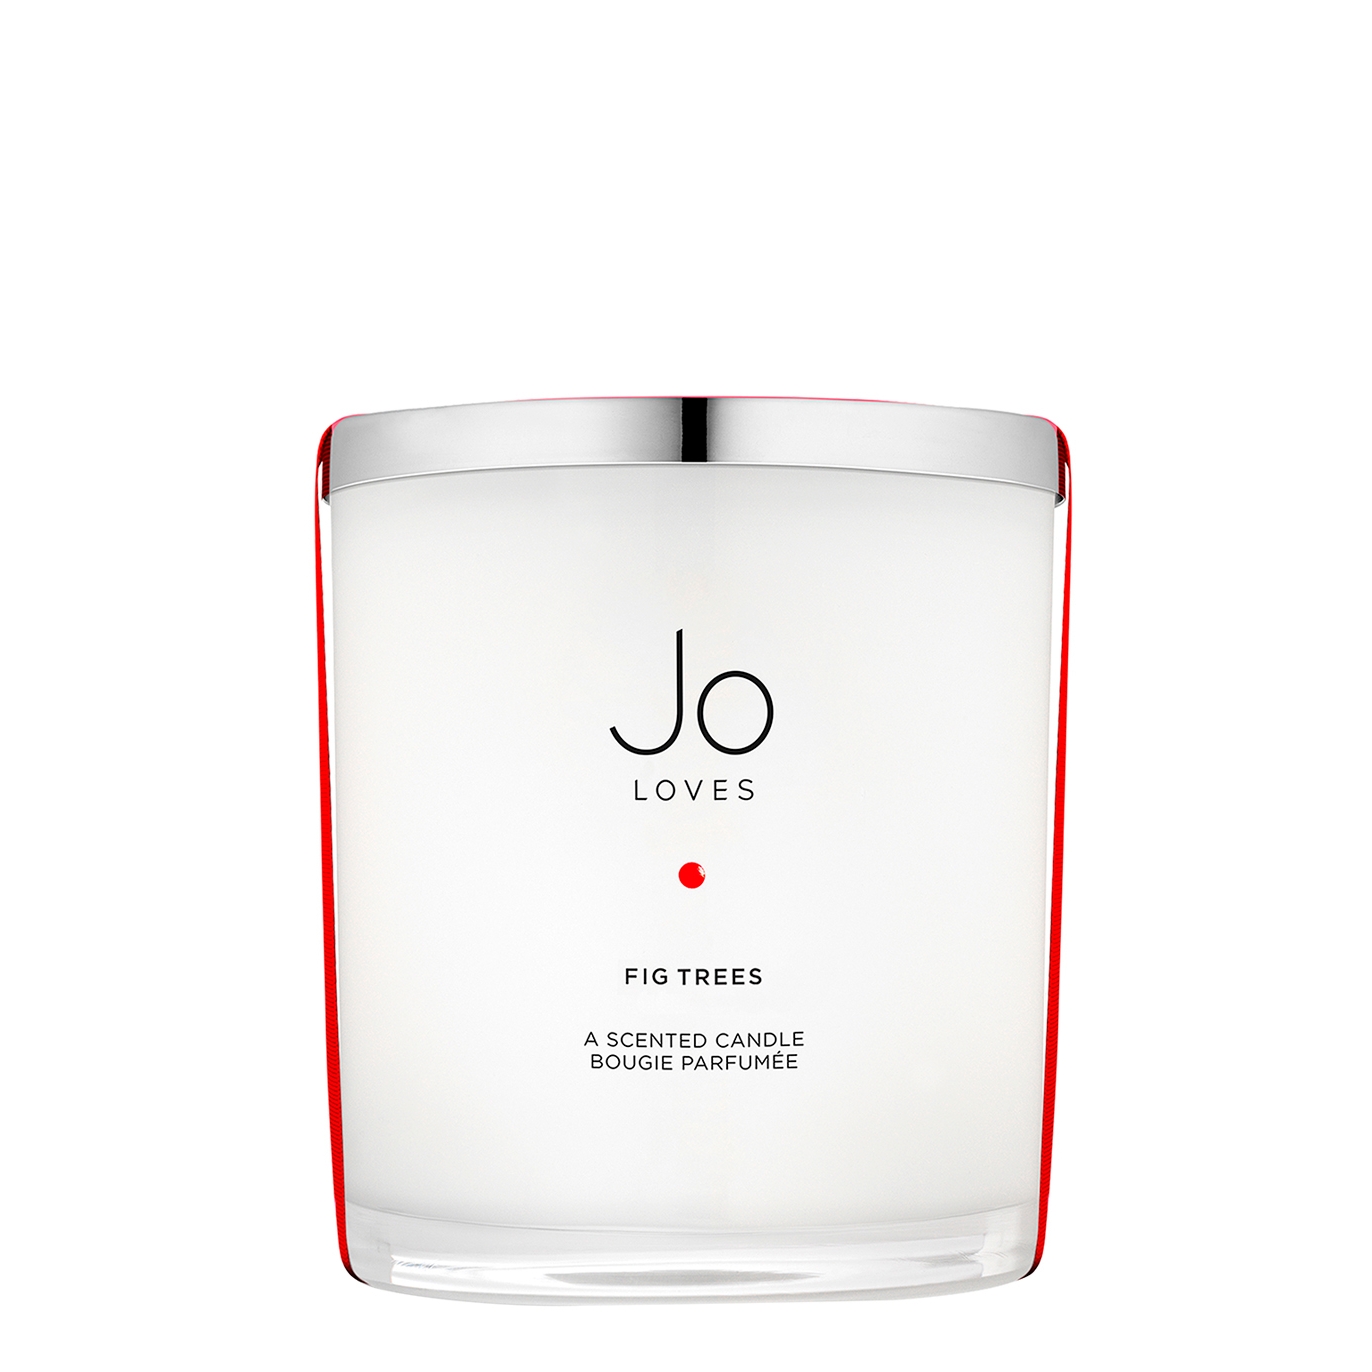 JO Loves Fig Trees Luxury Candle 2200g